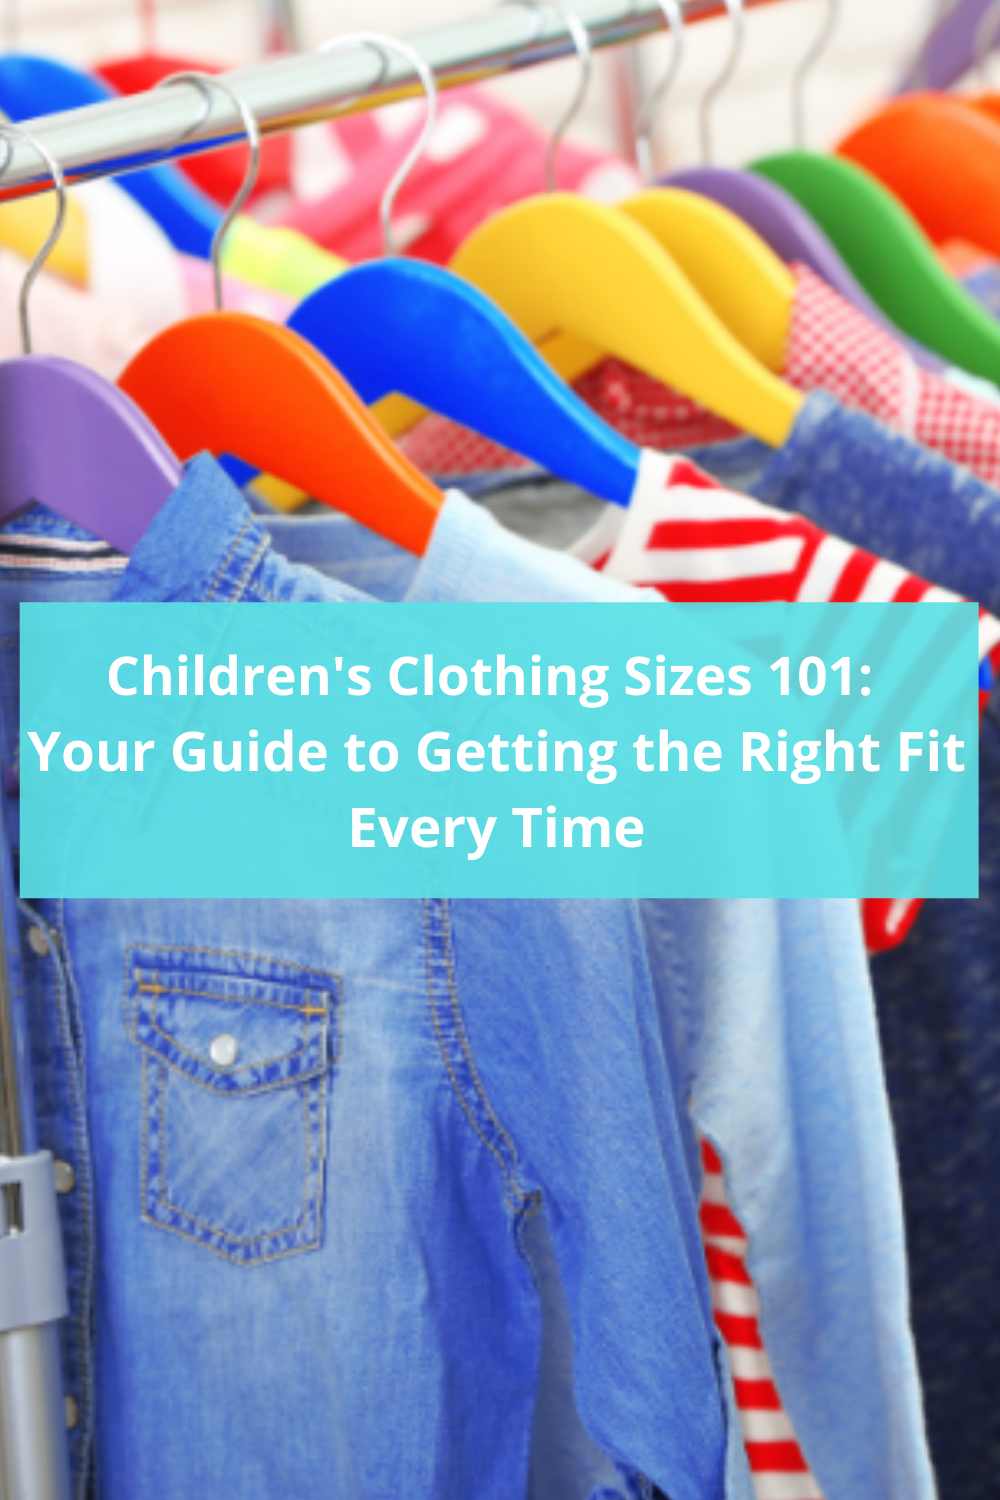 Simple Boys' Clothing Size Chart & Tips to Get the Right Fit - oggsync.com